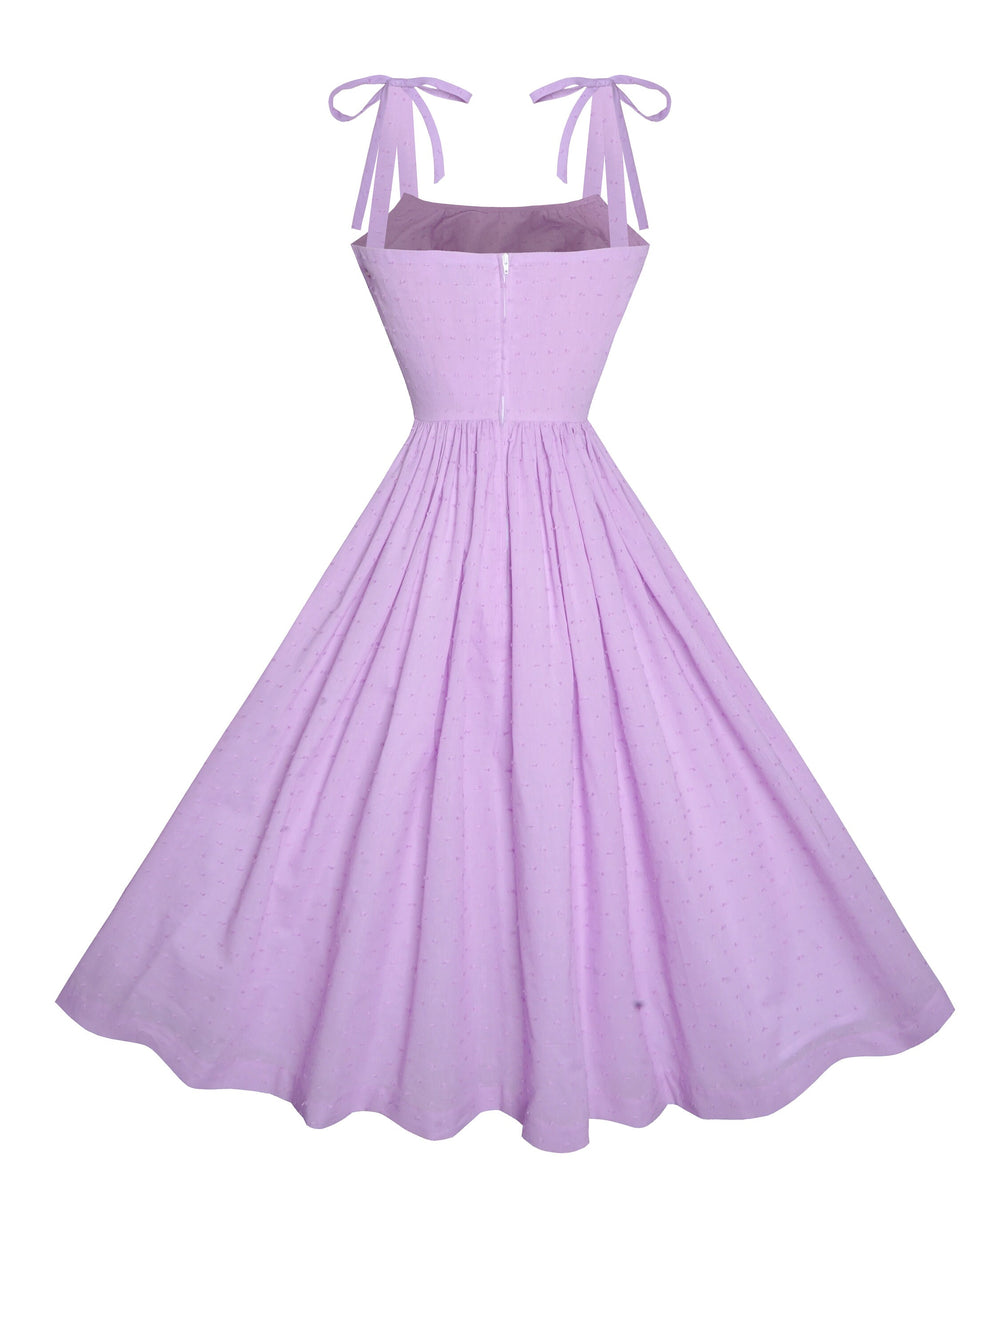 MTO - Kelly Dress Lavender "Dotted Swiss"